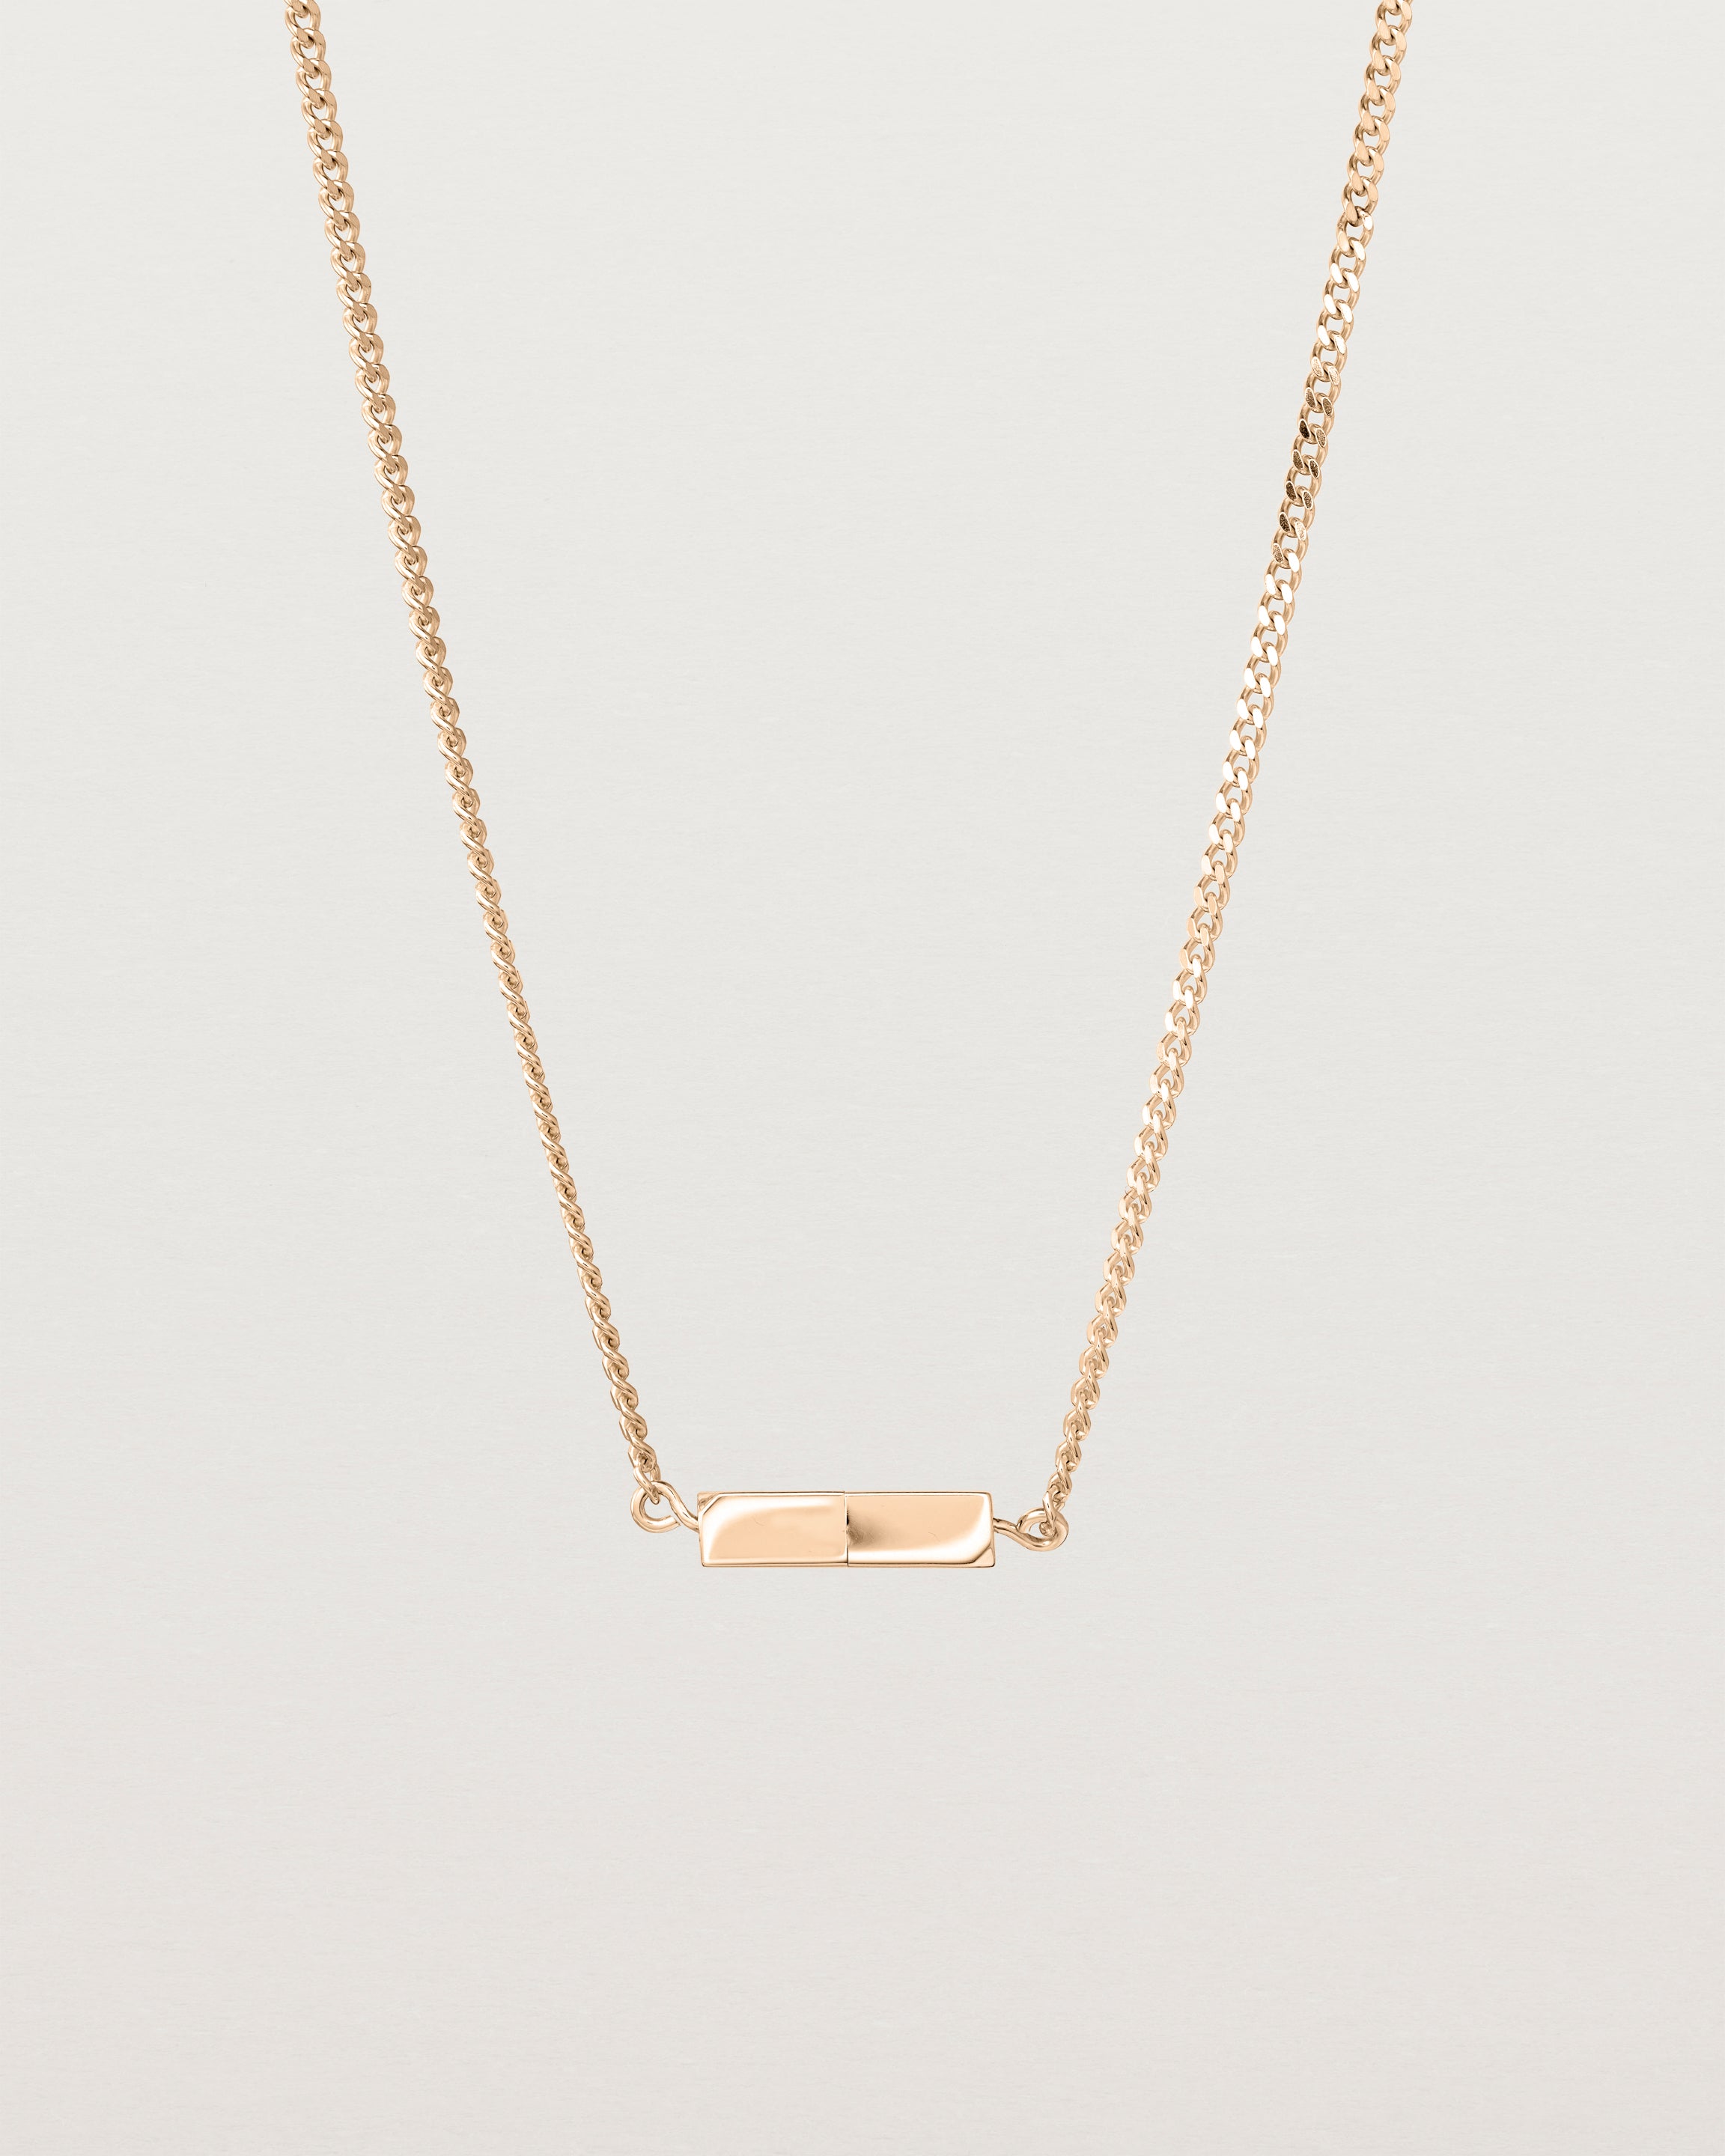 Front view of the Guardian Chain in rose gold.